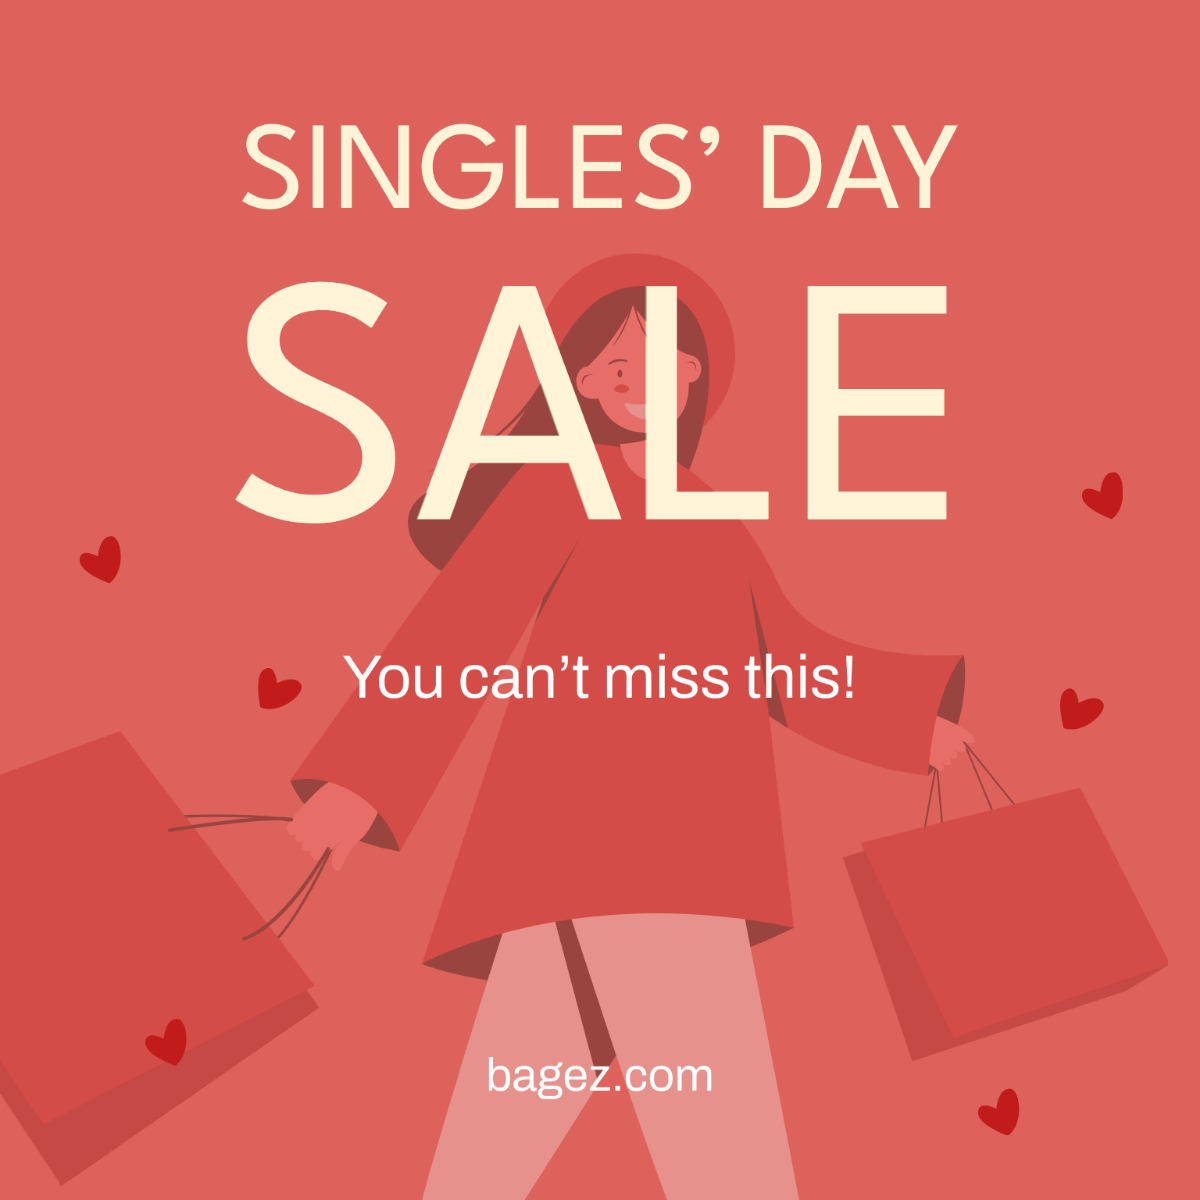 Free Singles Day Poster Vector Template